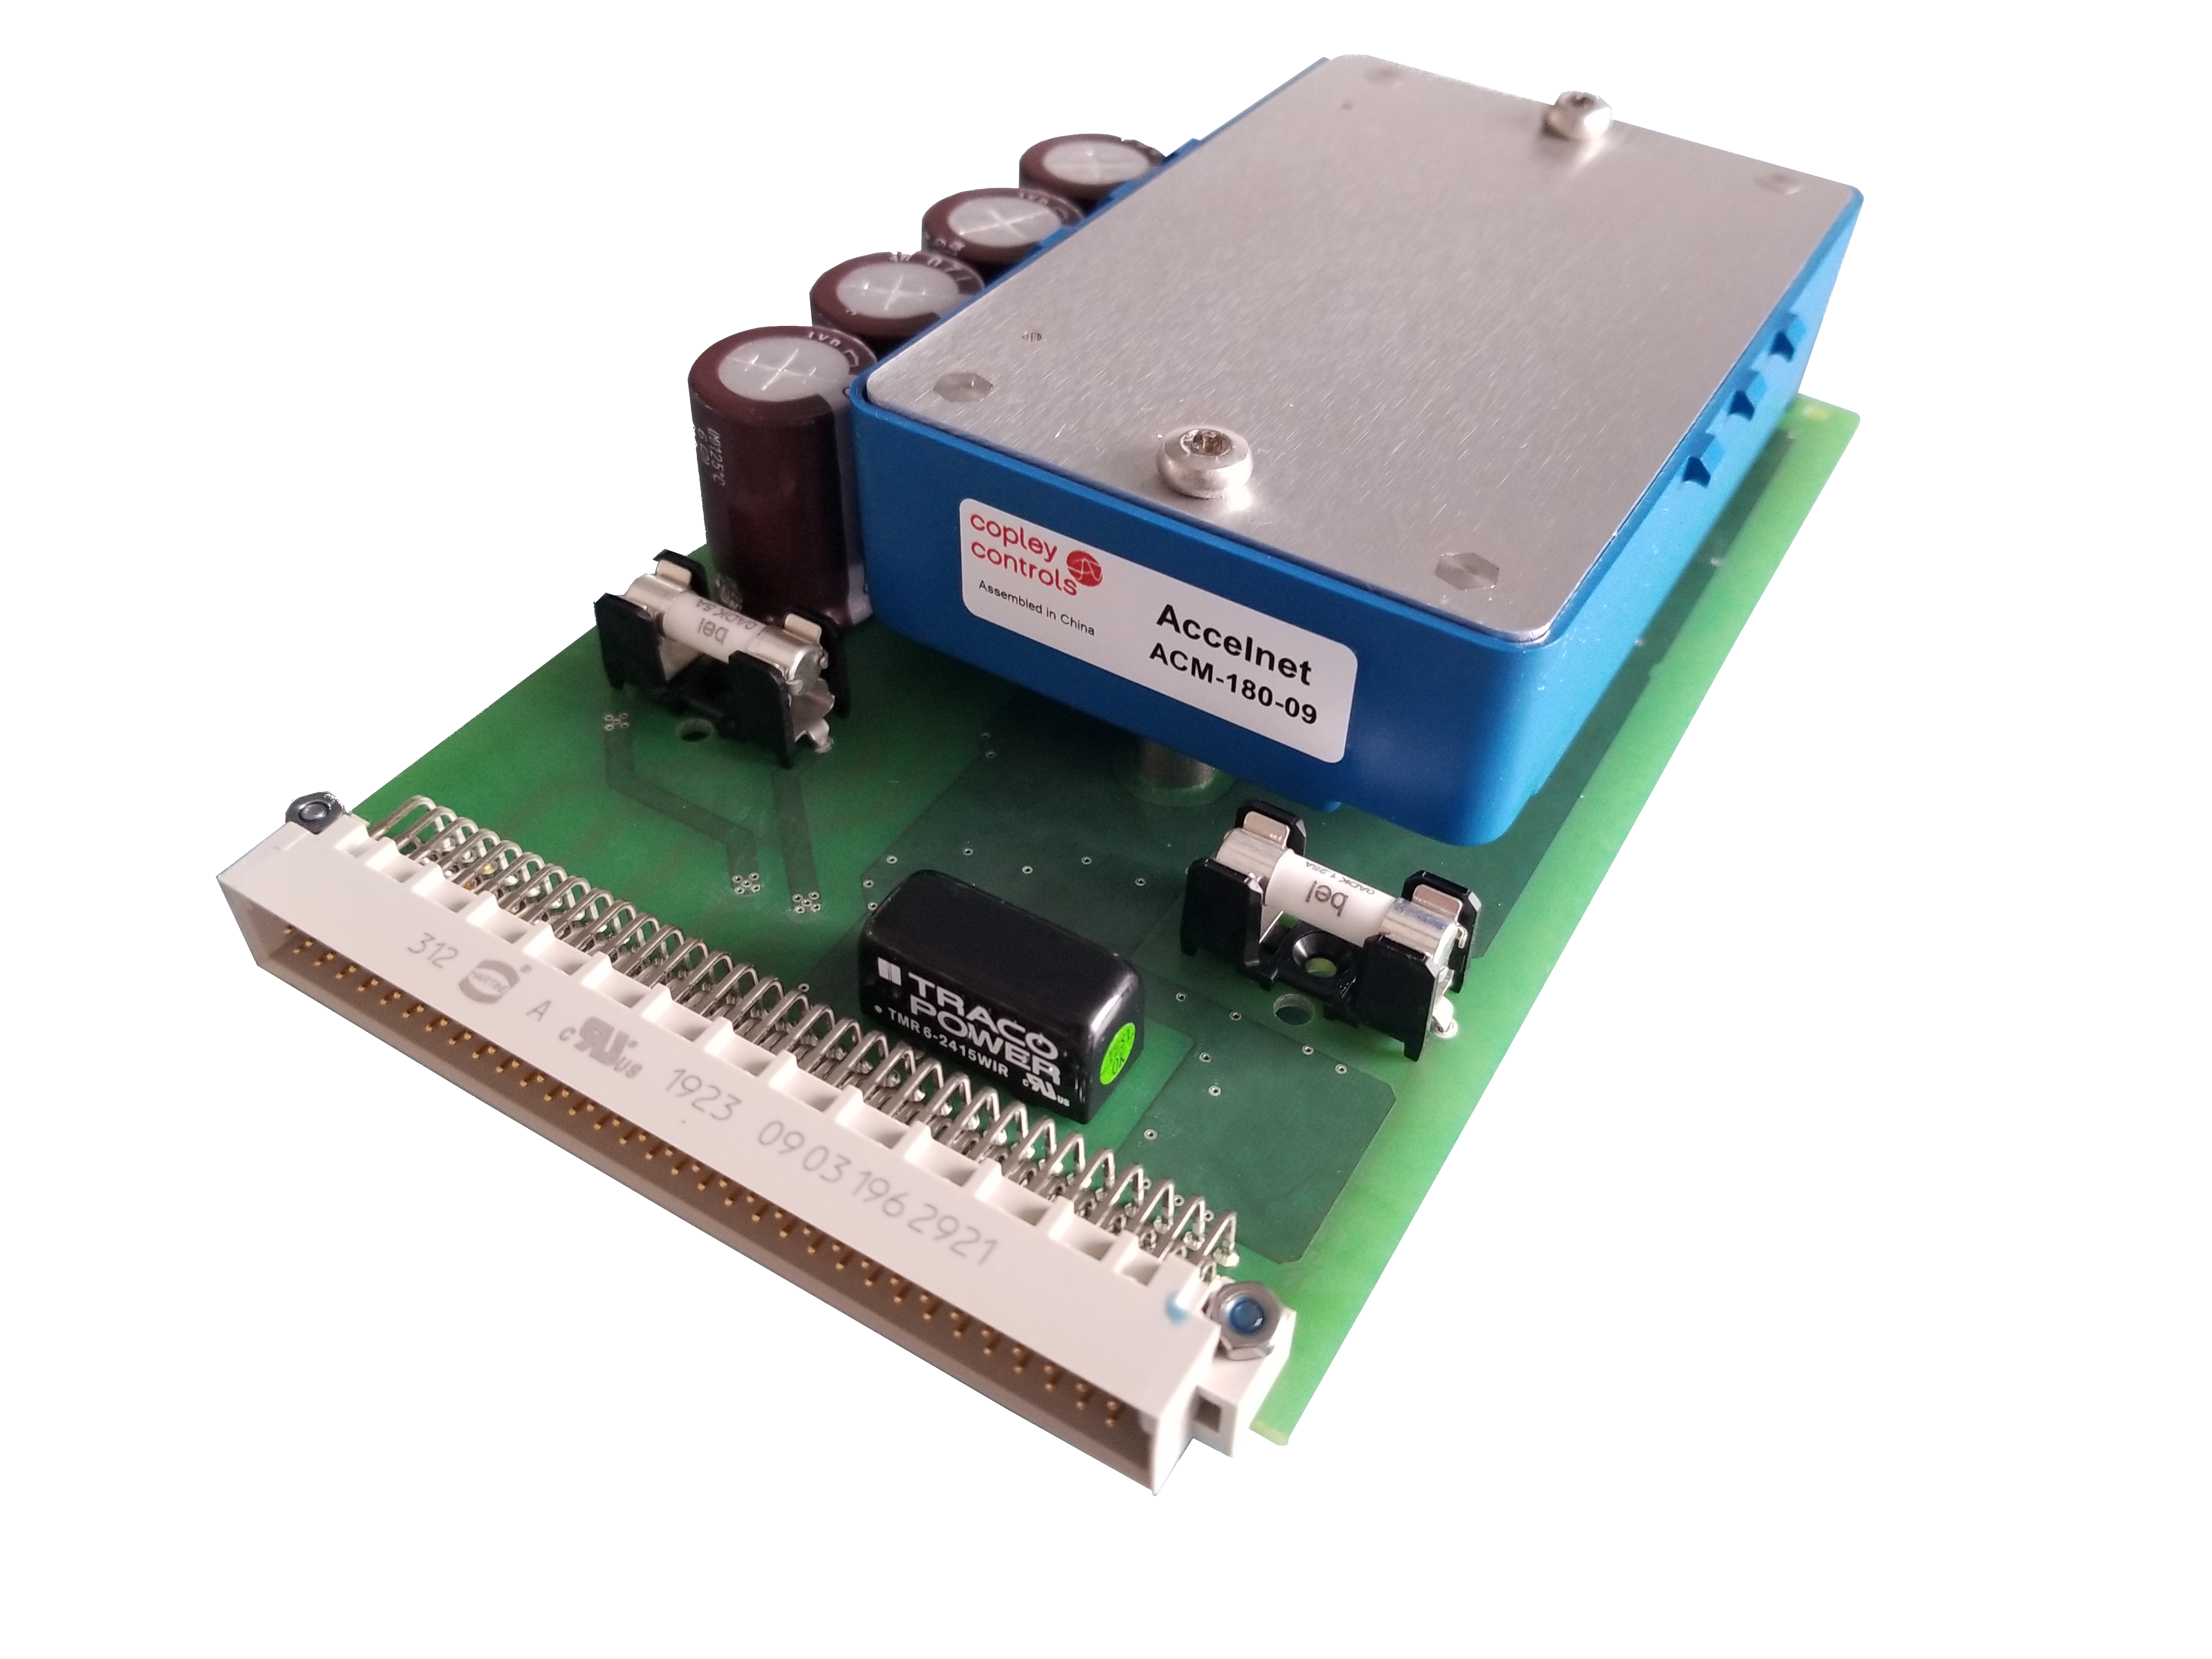 TWE-180-09_Plus: single channel drive controller for 19 Inch DIN rack mounting.